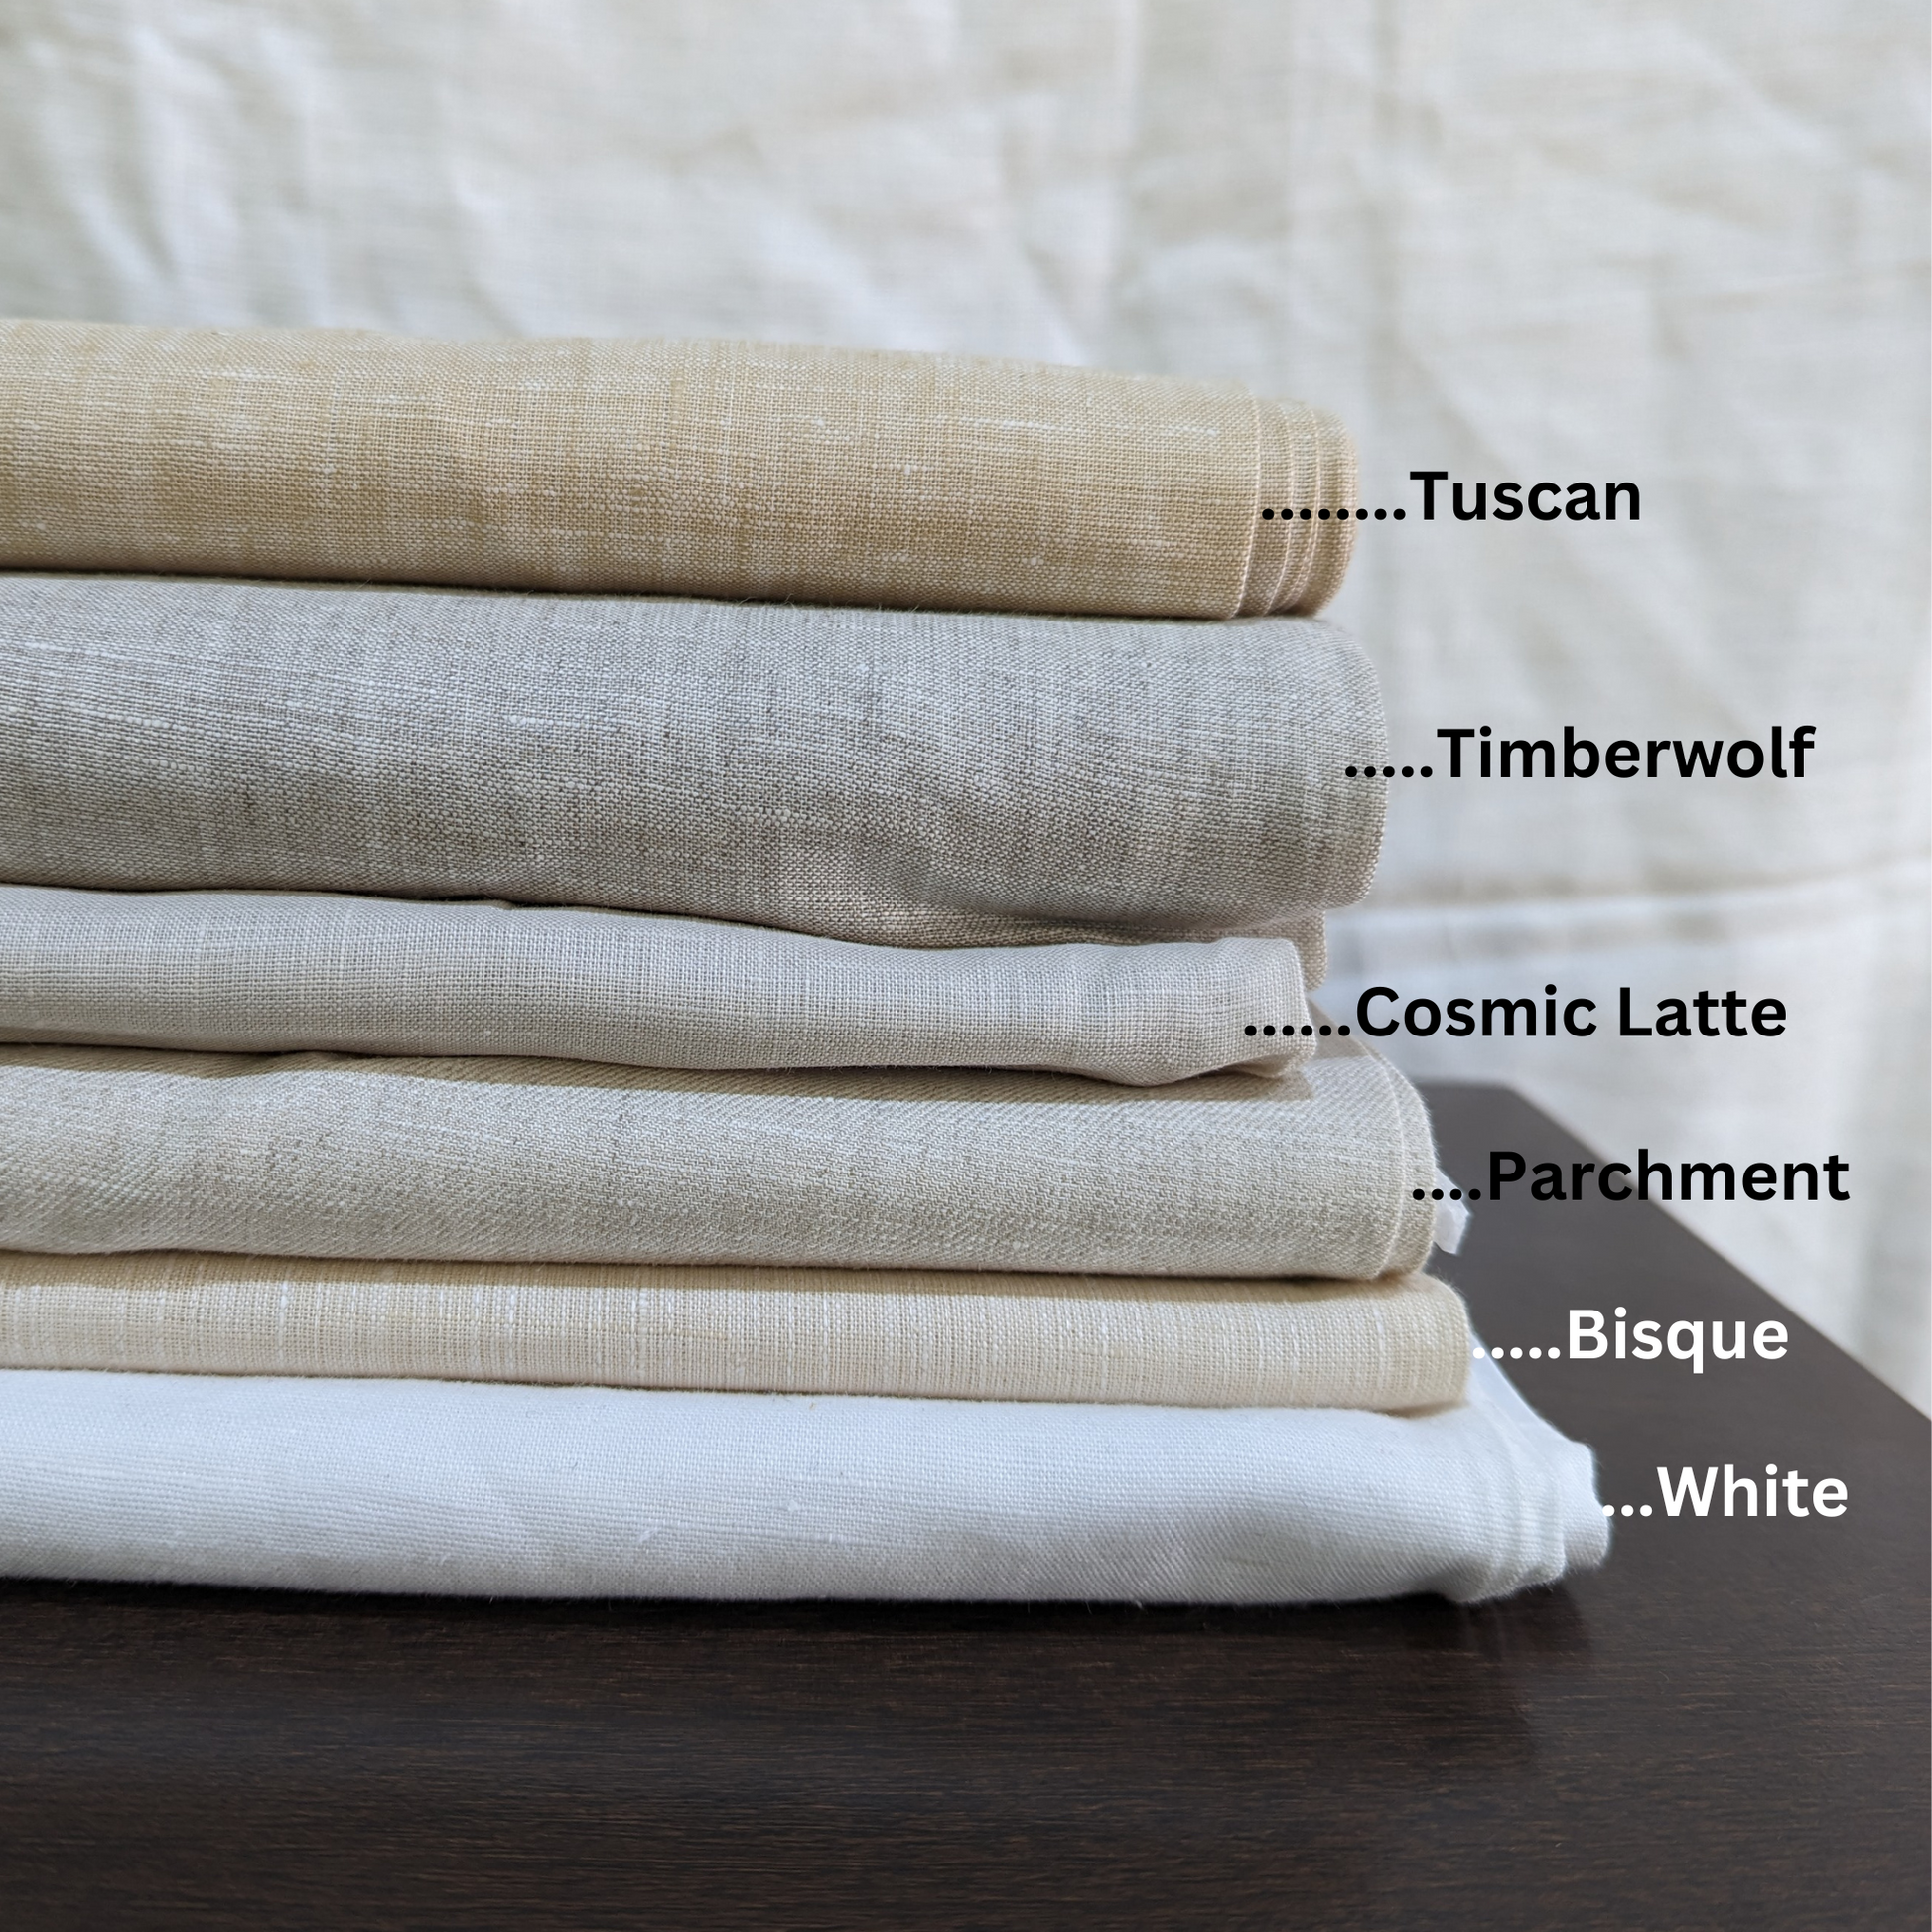 Earth & Beige: Shirting, Pure Linen Fabric, Used for Shirts, Dresses, Tops - OrganoLinen